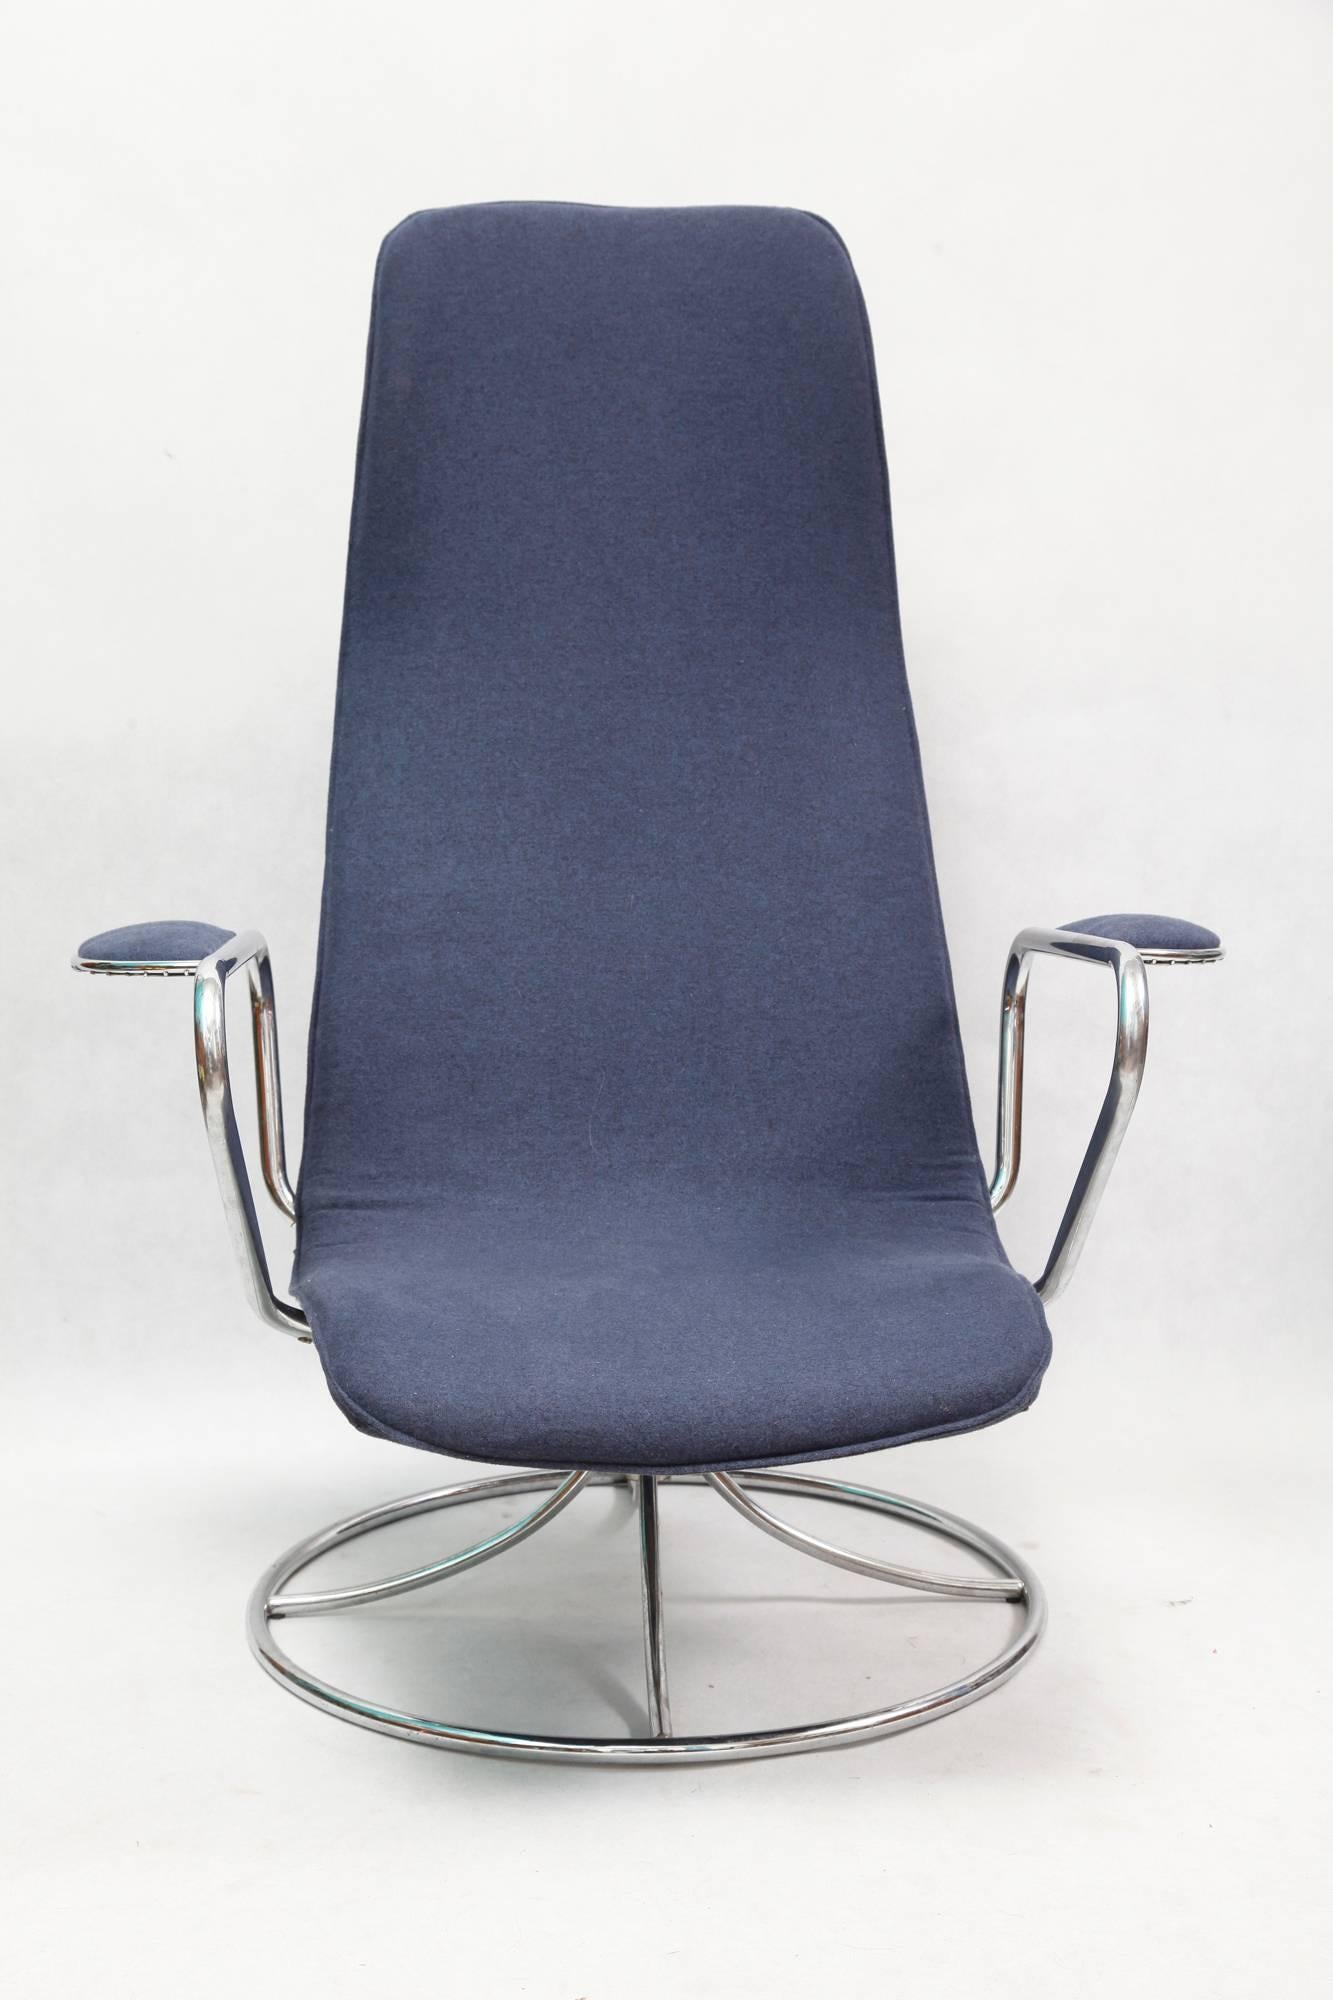 A lounge chair, from the end of the 1980s, with a low seating position. Definitely not to the desk or table. Exquisite in front of the TV. 
The seat is covered with dark blue felt. It has a new filling inside, which makes it very